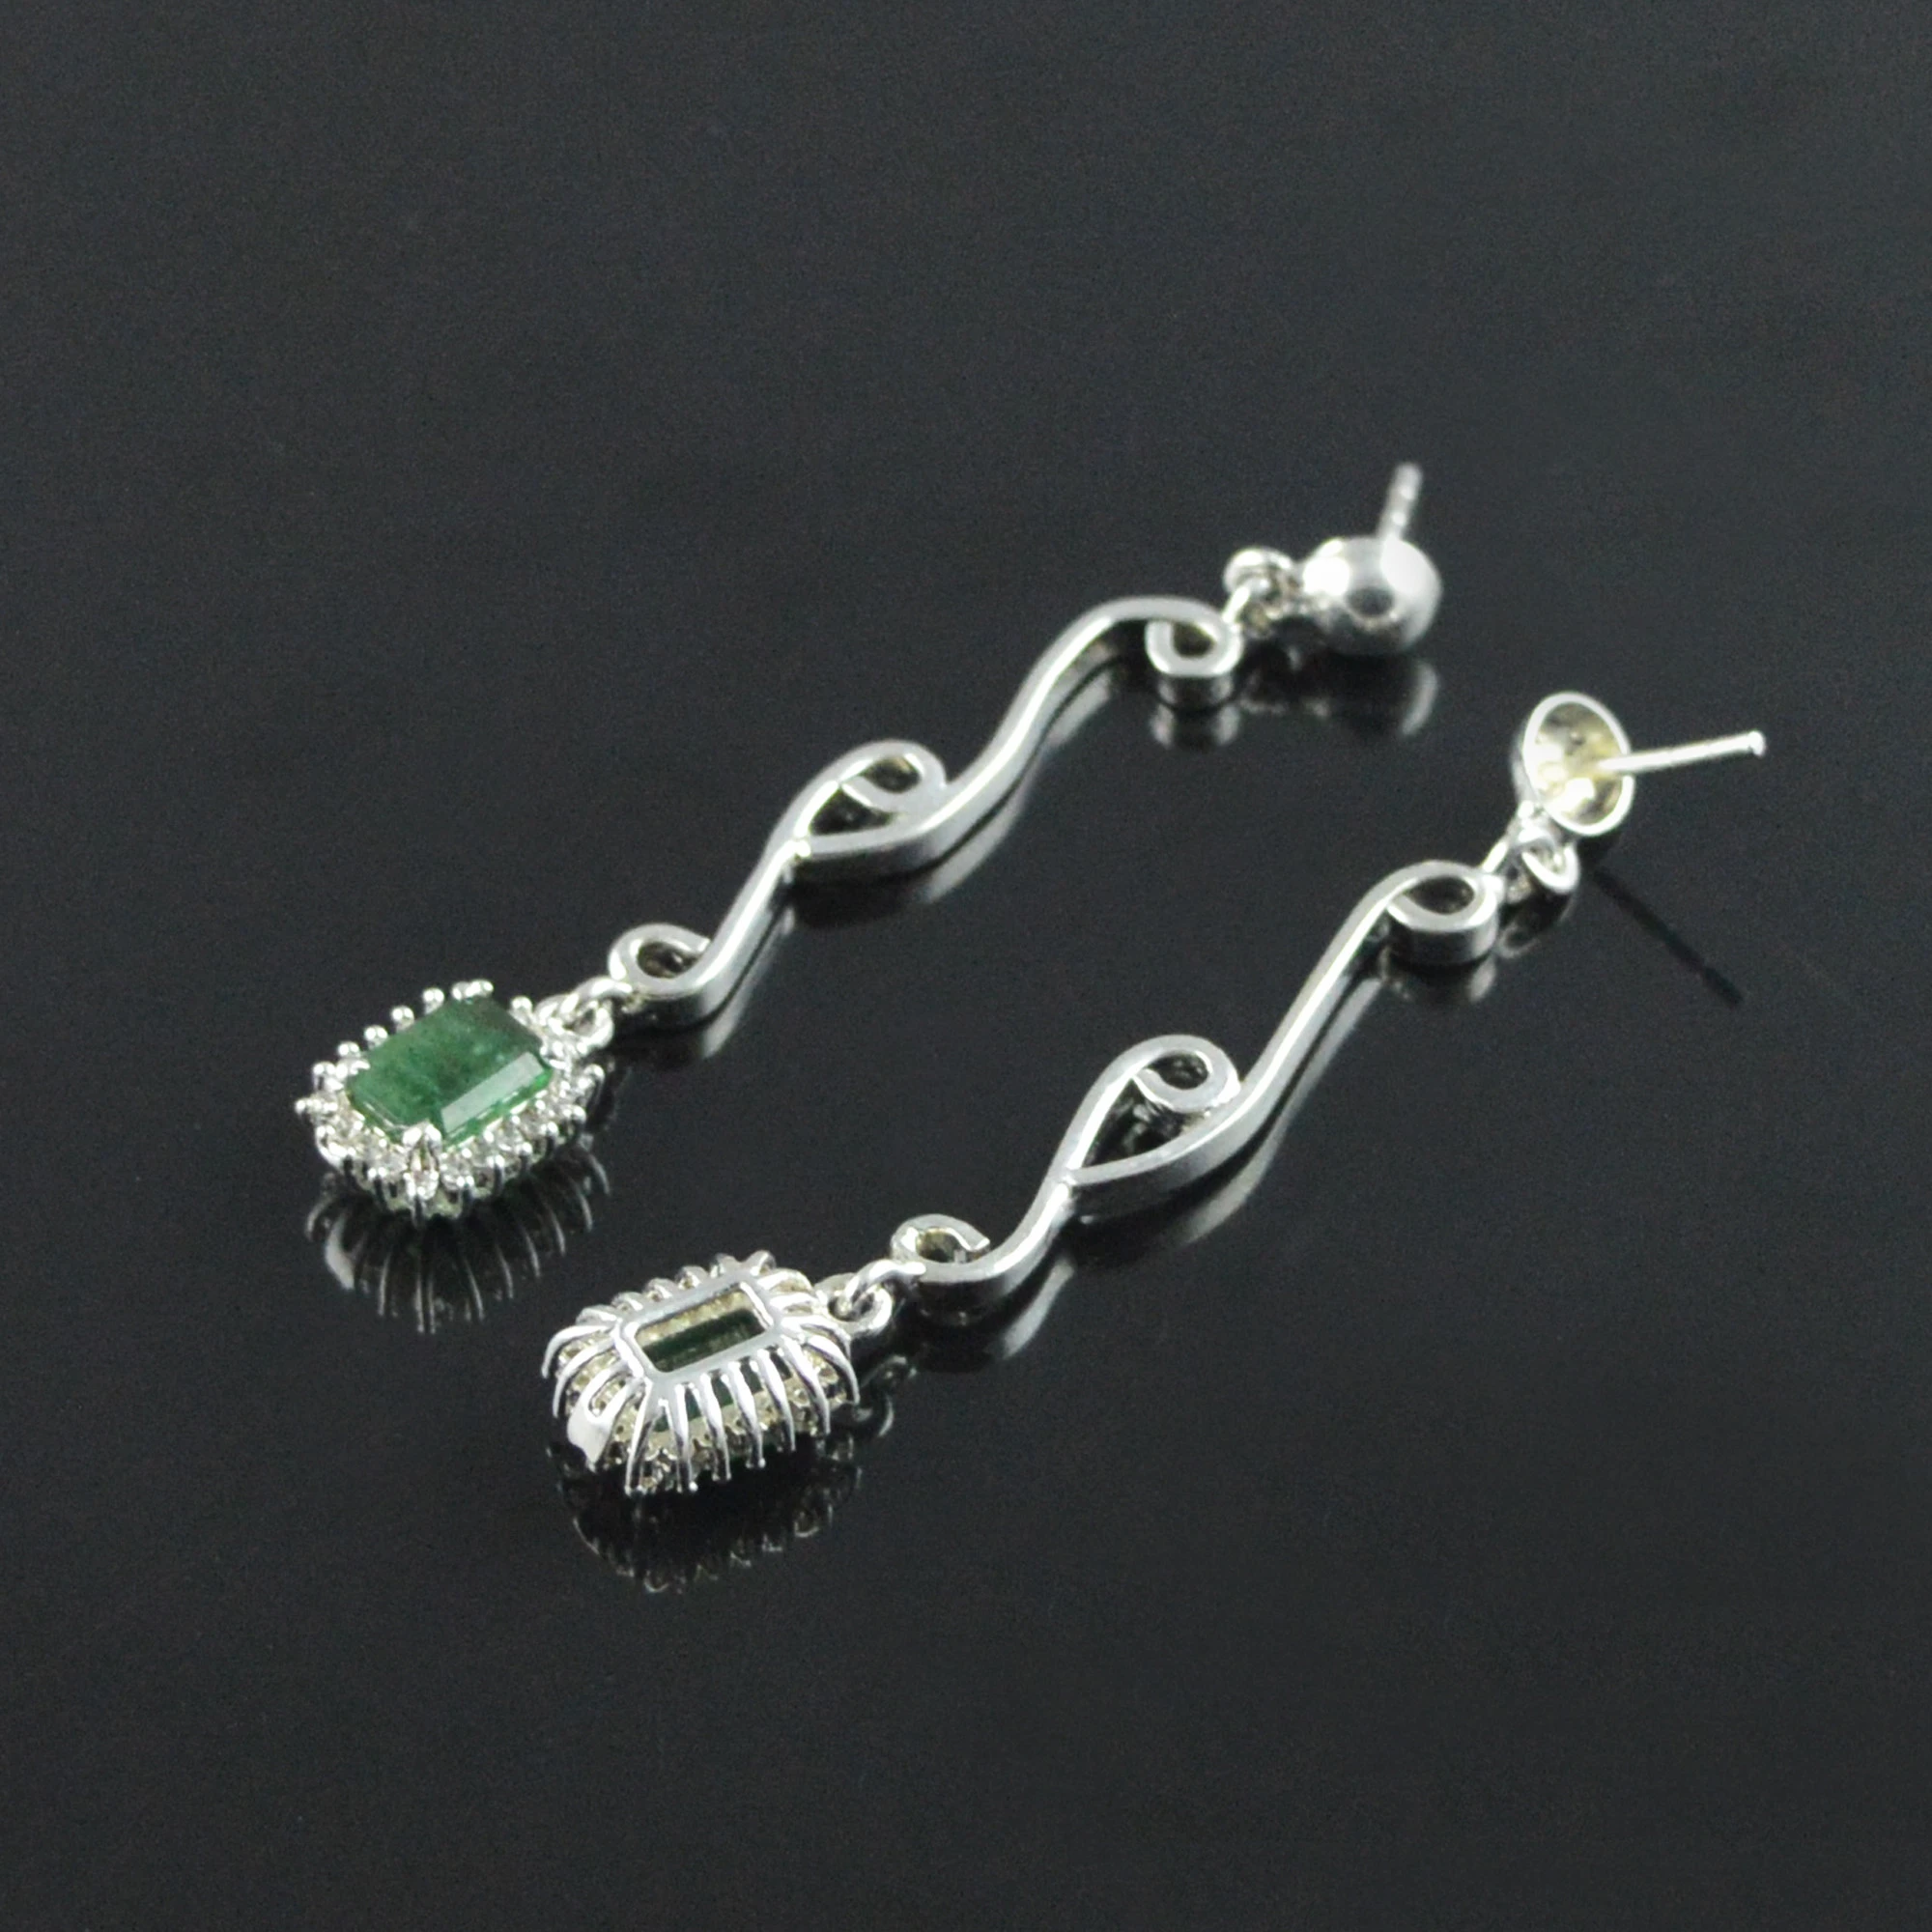 Wholesale 925 Sterling Silver Natural Emerald Gemstone Earrings Jewelry Dangle And Drop Earrings Present Supplier Manufacturer